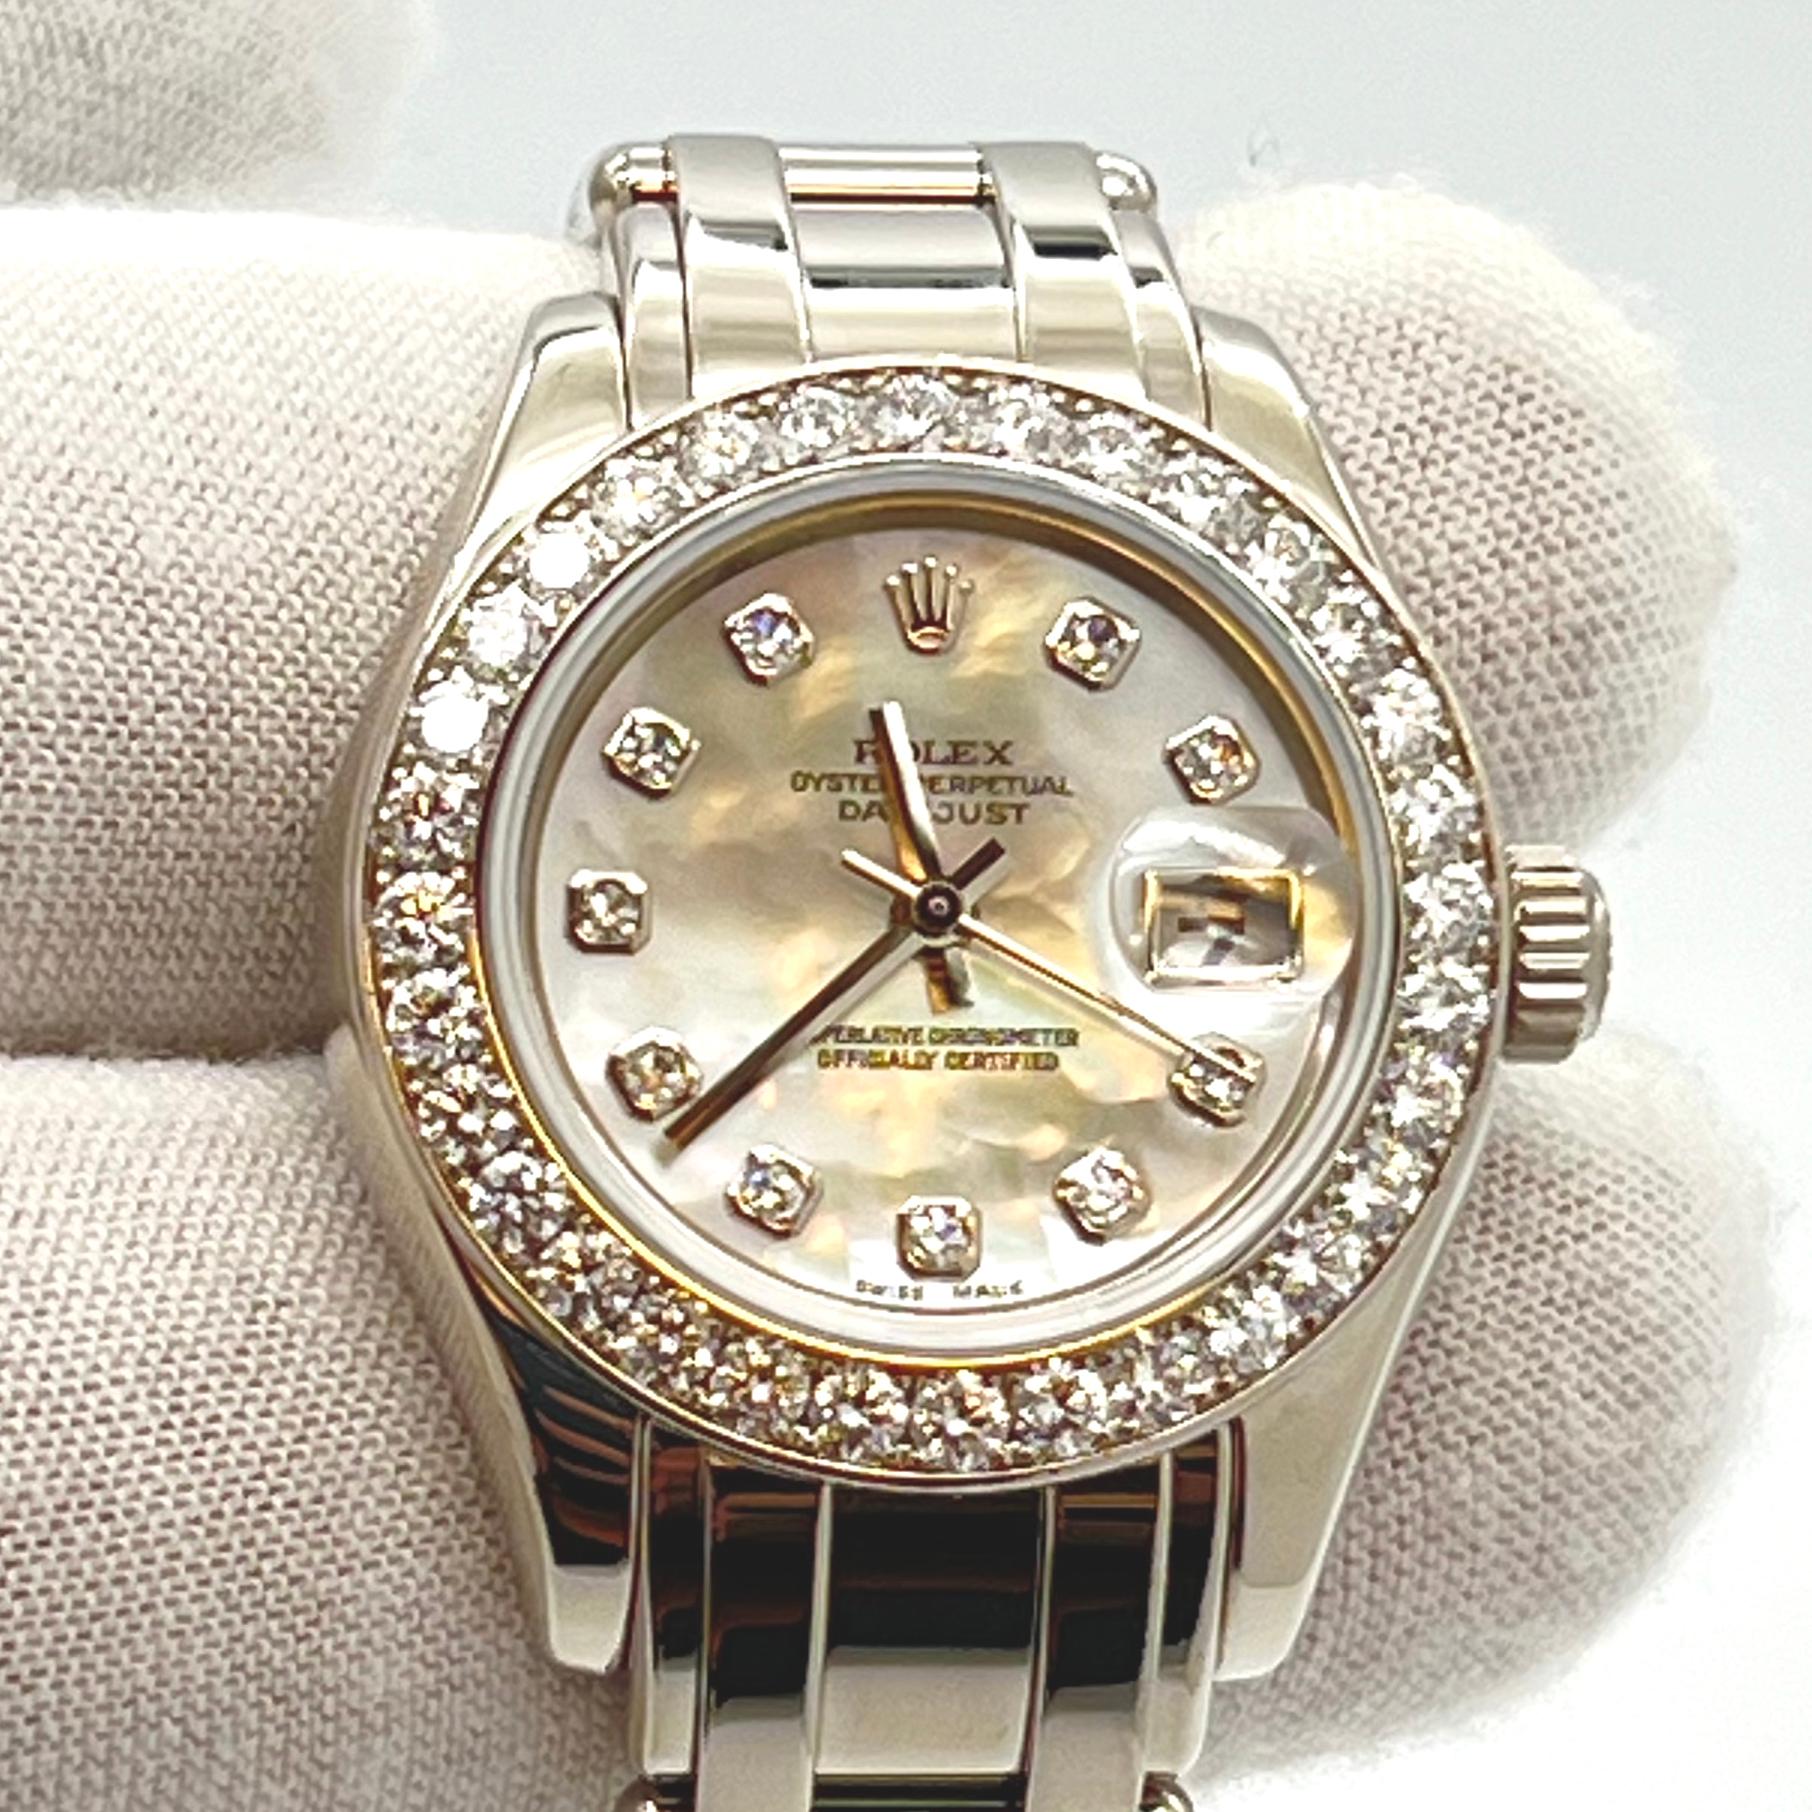 The Rolex Lady-Datejust Pearlmaster, reference number 80299, a refined timepiece tailored for women seeking both elegance and functionality. Crafted from white gold, this watch is in very good condition, ideal for those who appreciating quality